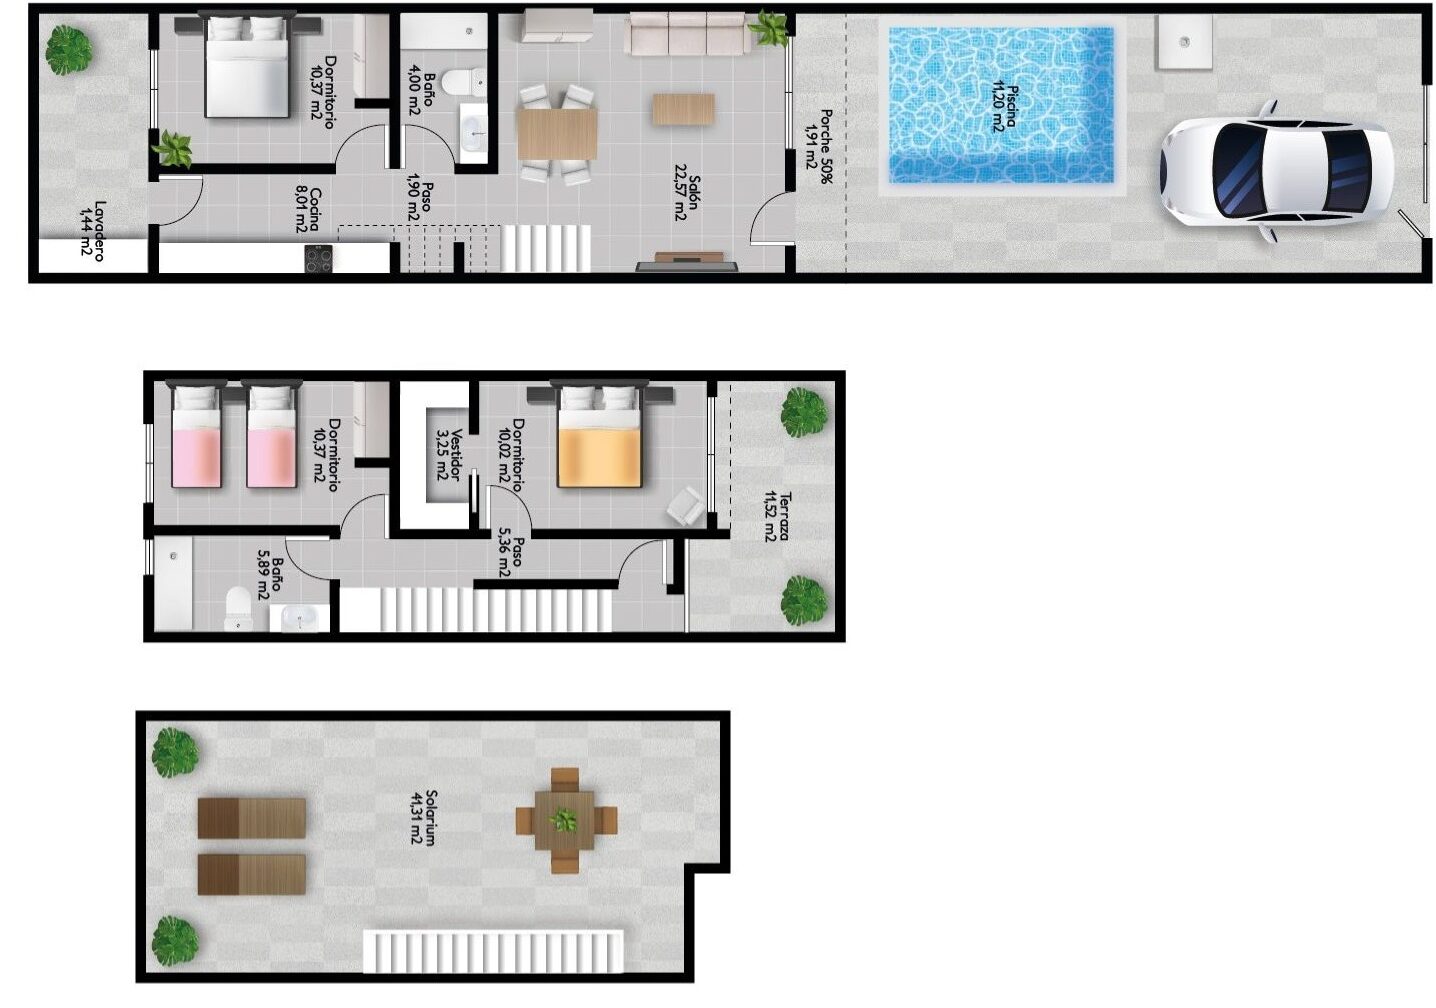 STANDARD 3-BED LAYOUT